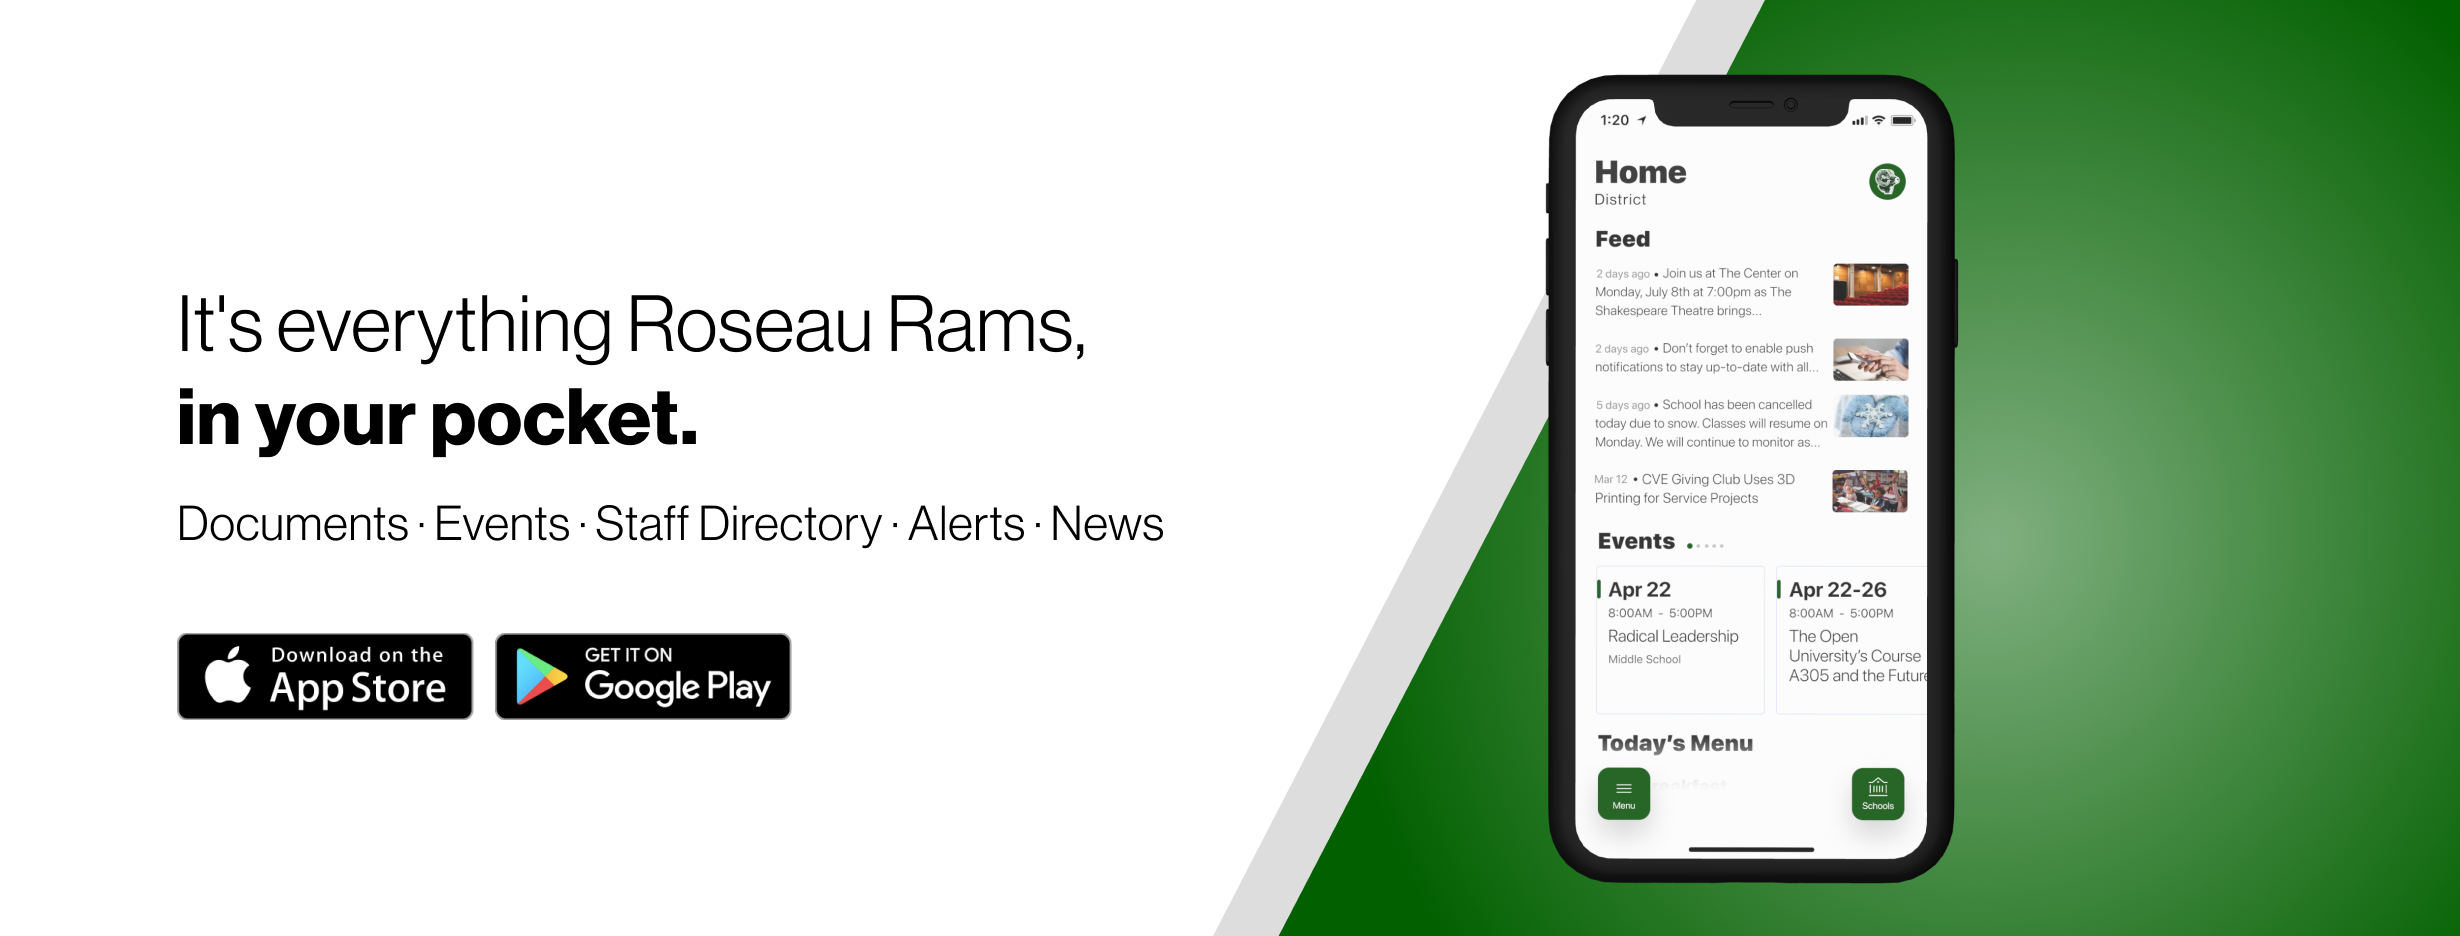 Everything Roseau Rams in your pocket. Search Roseau School District on the App Store or in Google Play